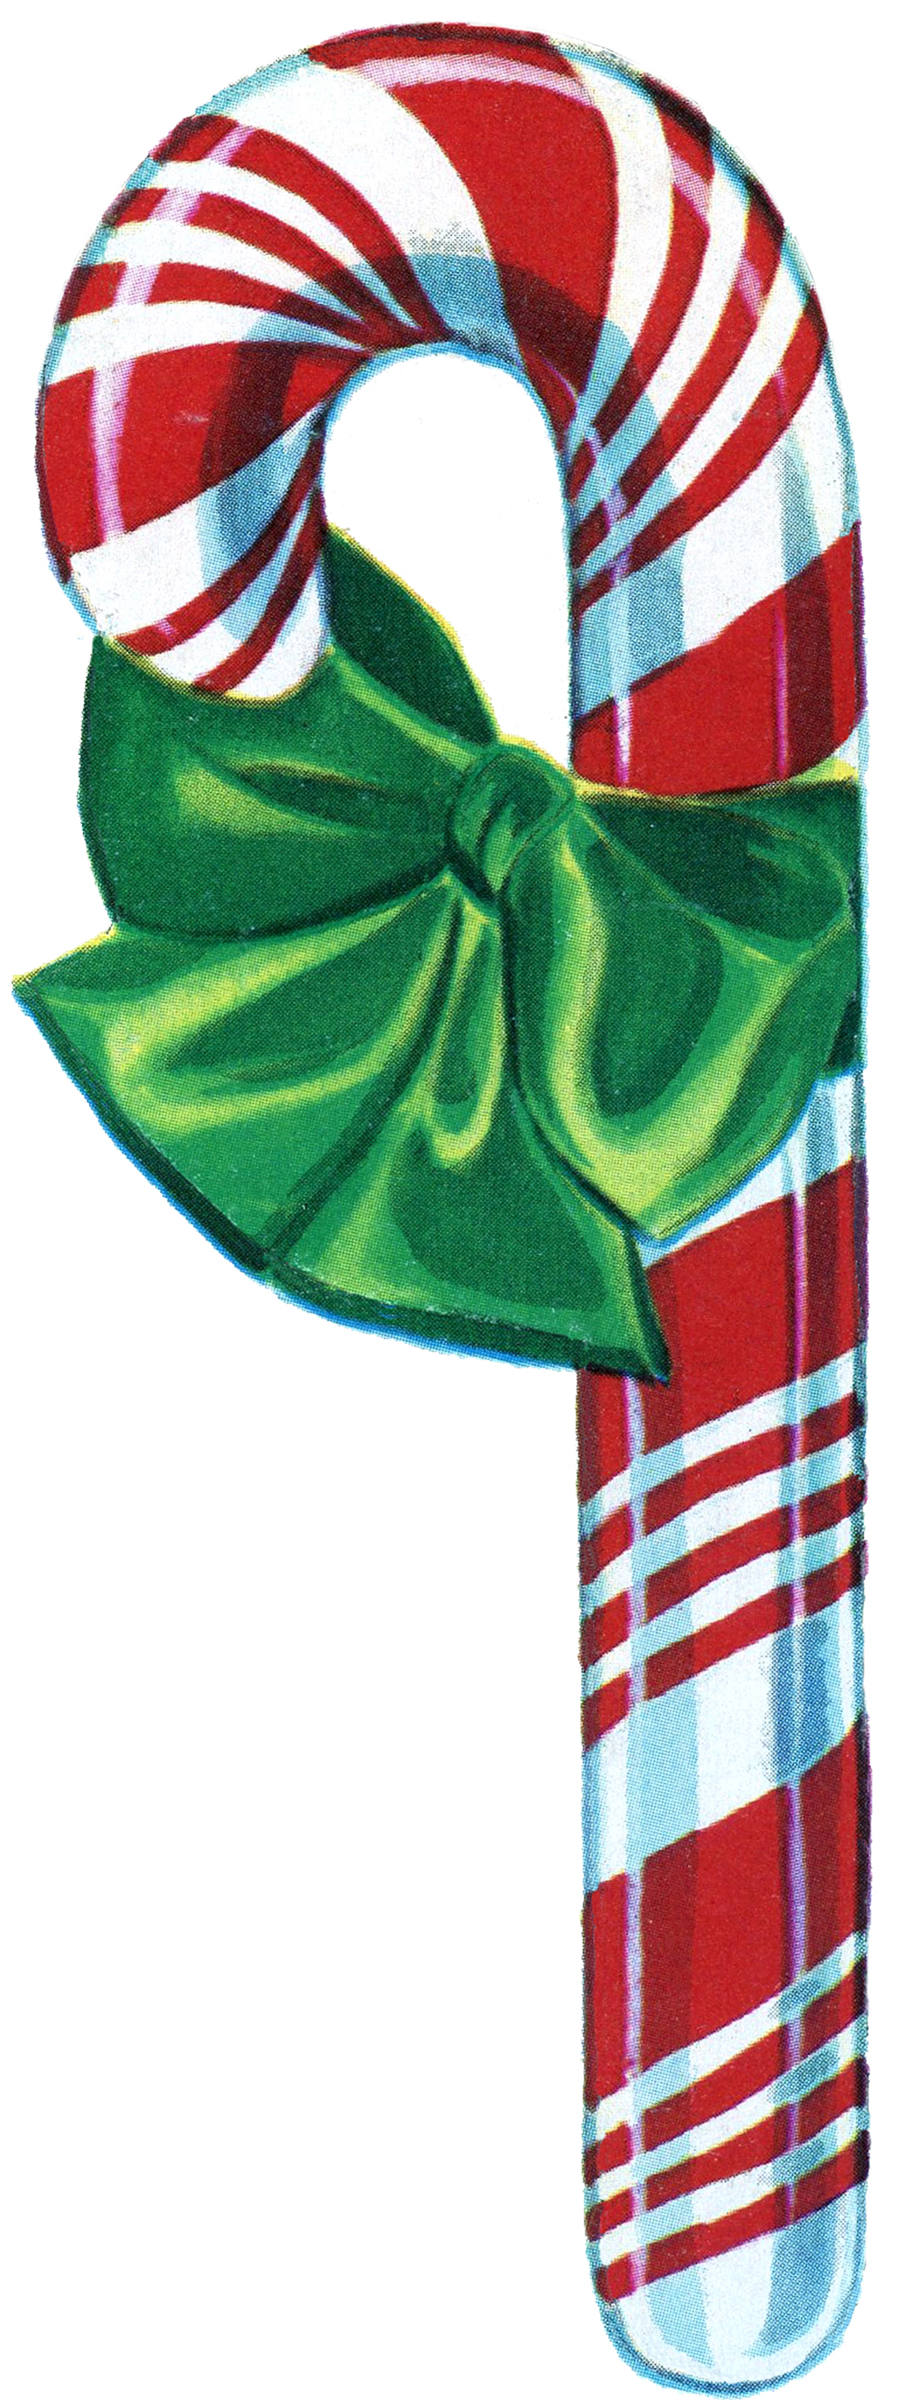 Free vintage christmas clip art candy cane the graphics fairy